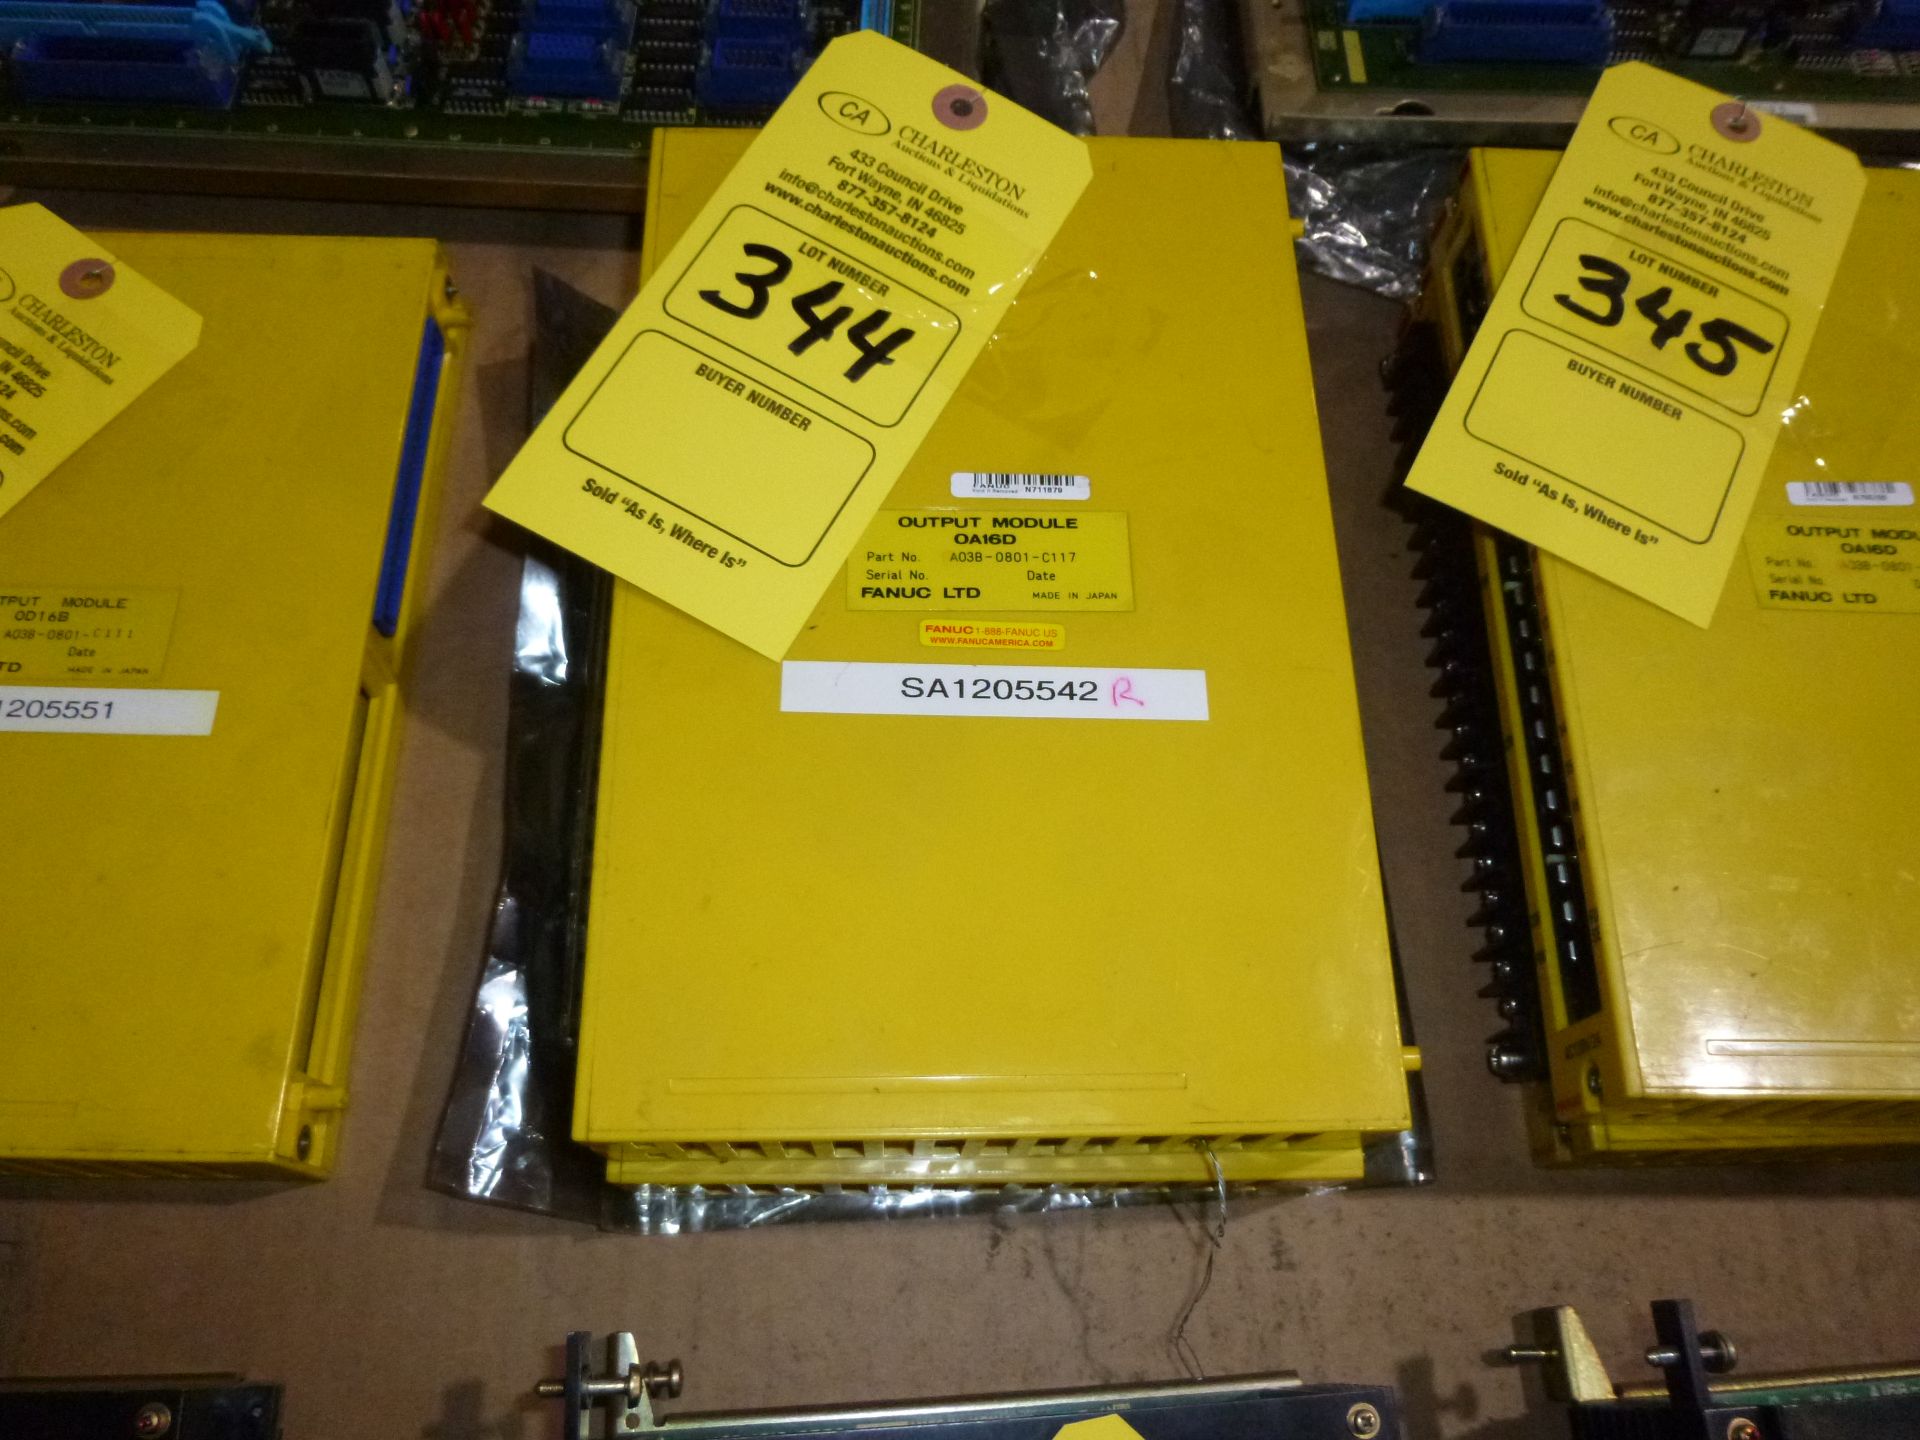 Qty 2 Fanuc output module model A03B-0801-C117, as always with Brolyn LLC auctions, all lots can